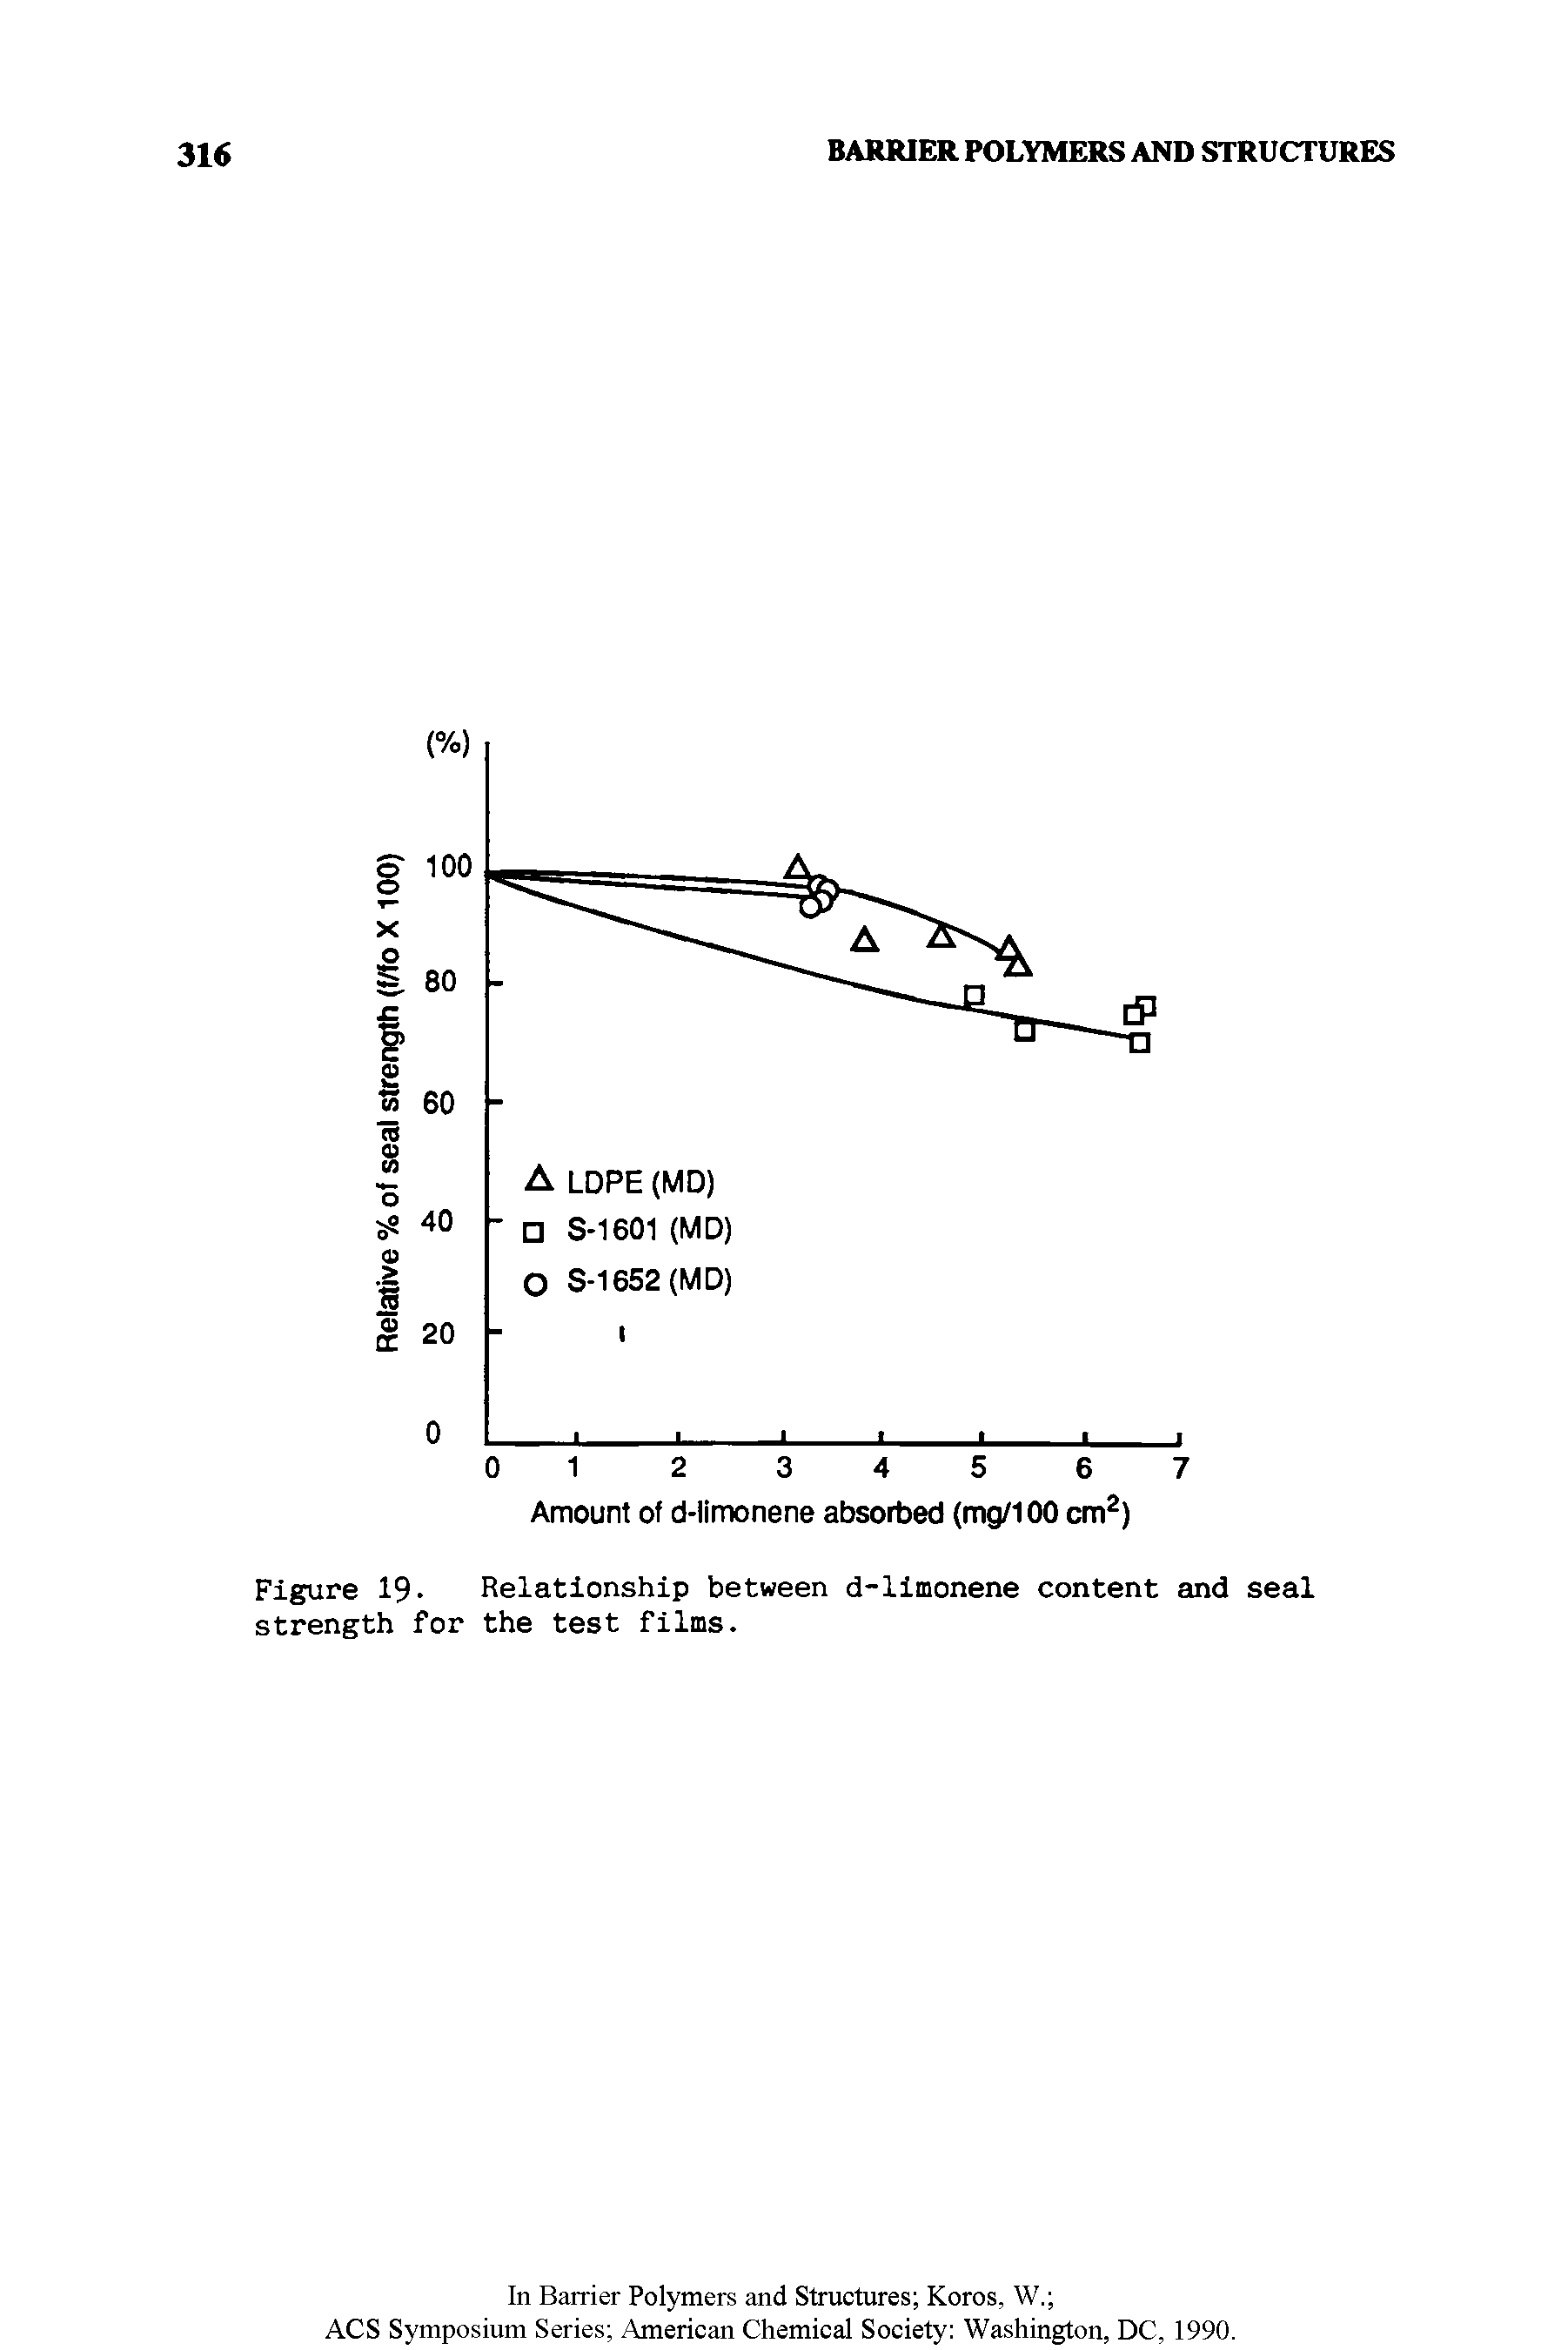 Figure 19- Relationship between d-limonene content and seal strength for the test films.